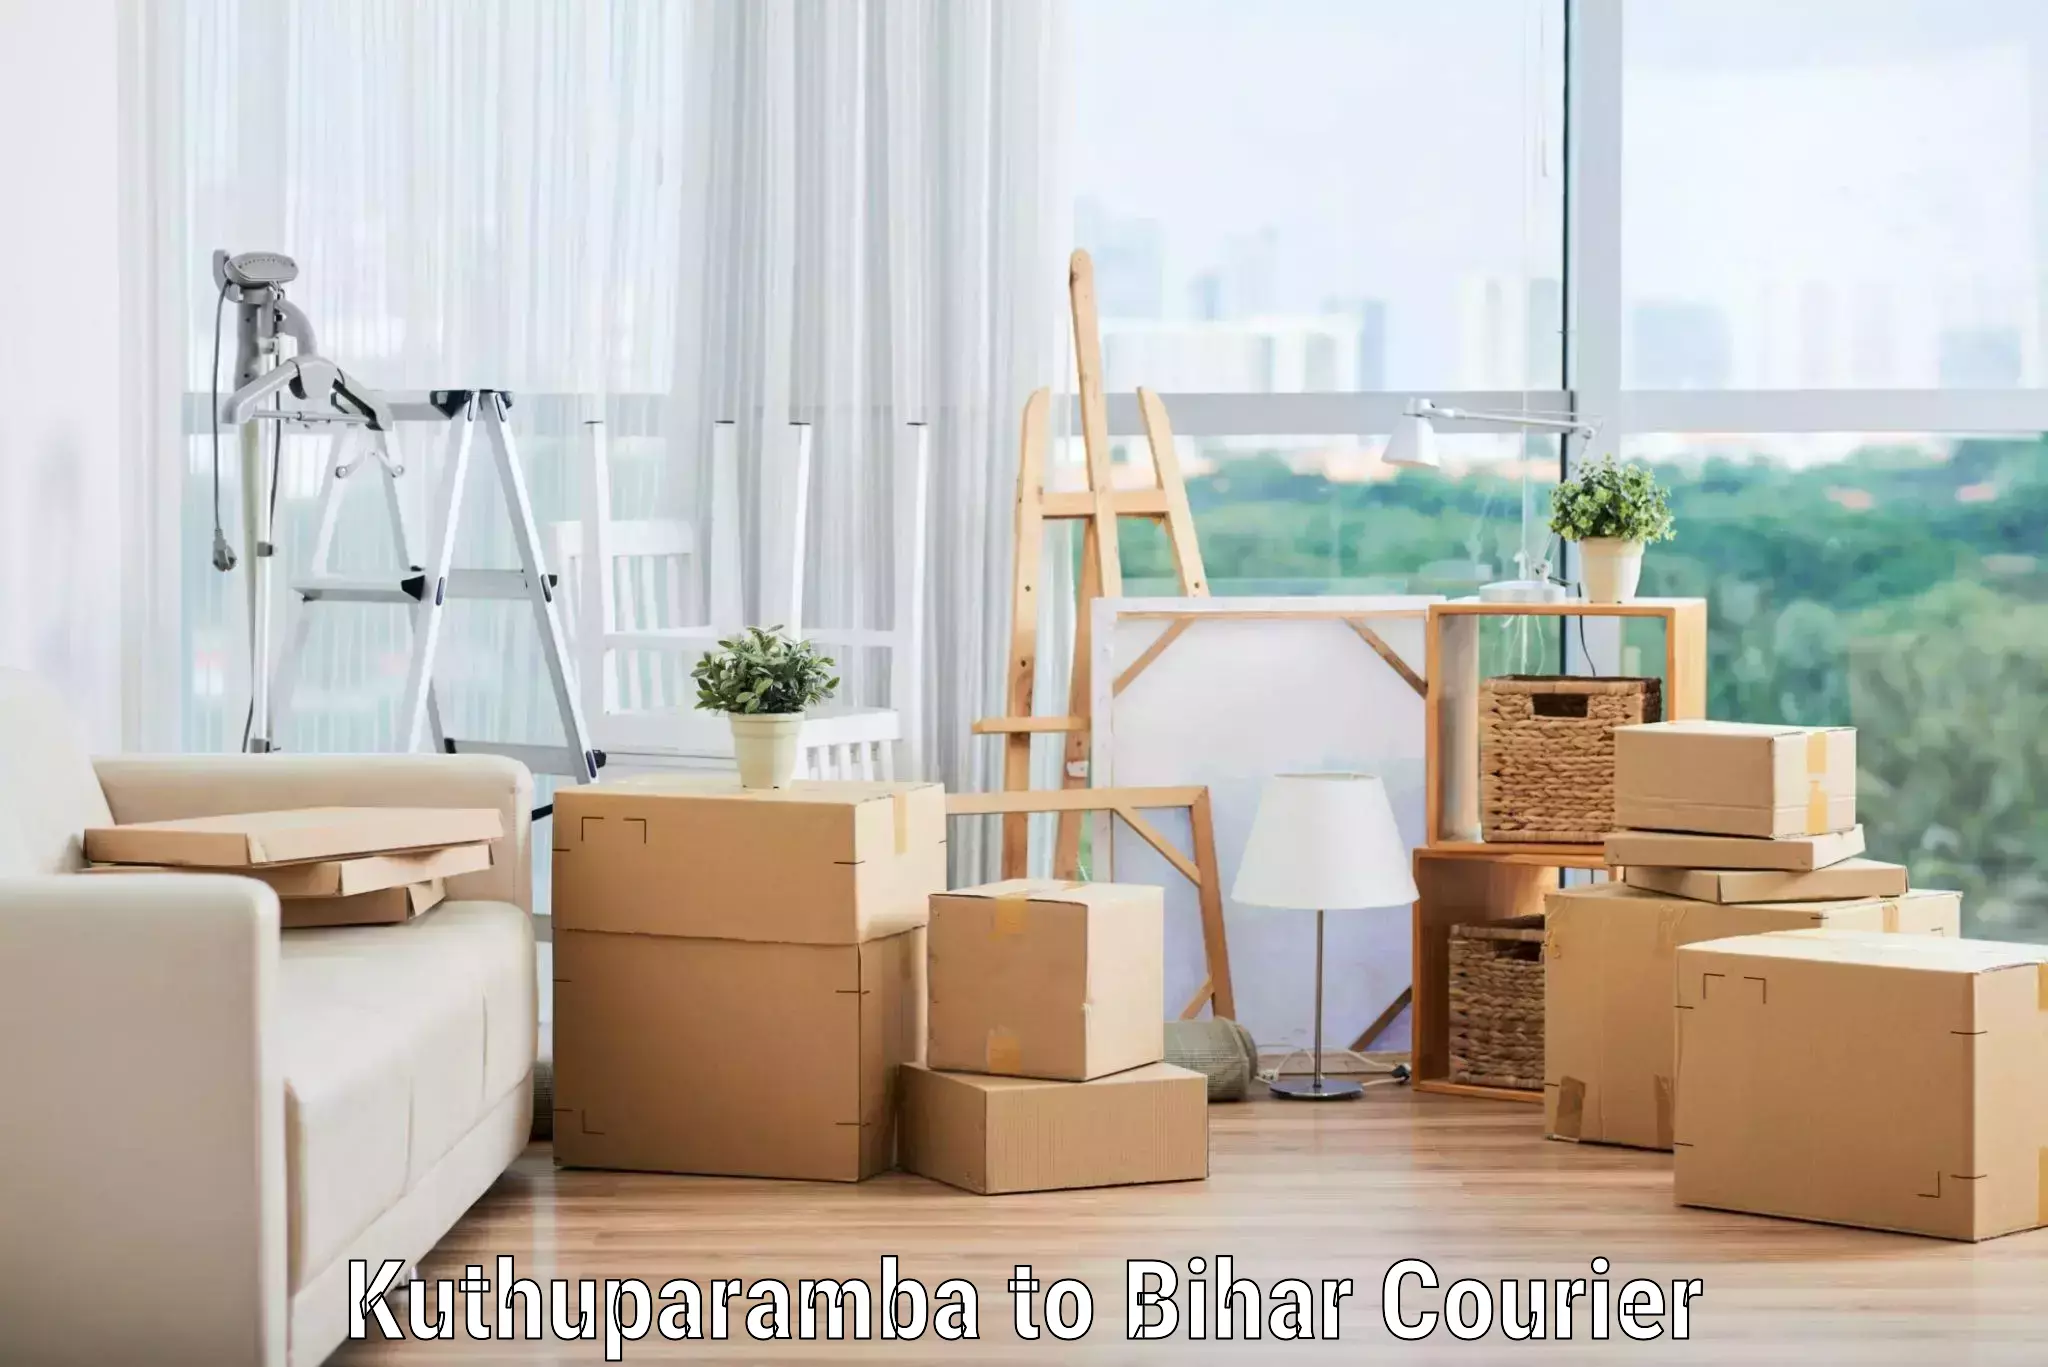 Door-to-door relocation services in Kuthuparamba to Madhubani